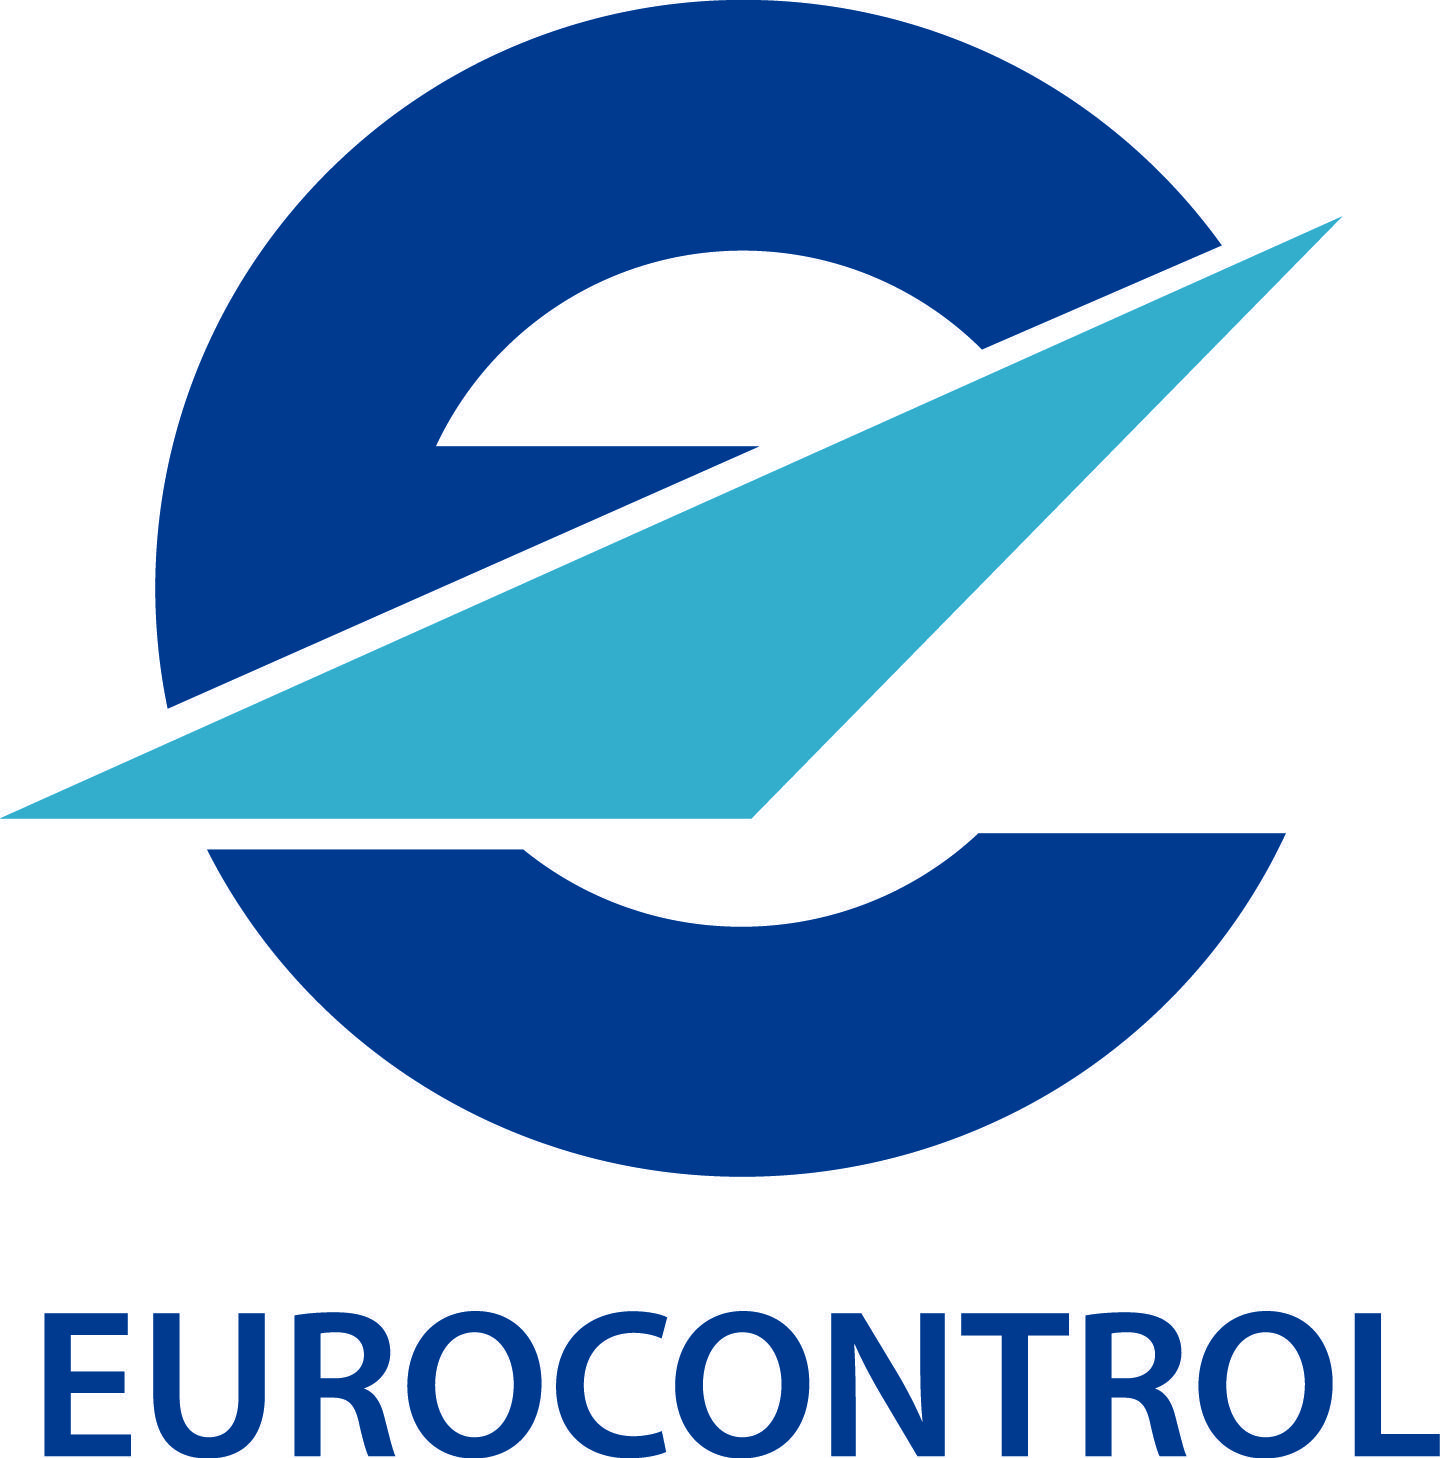 Teal and Blue Logo - Logo guidelines | Eurocontrol